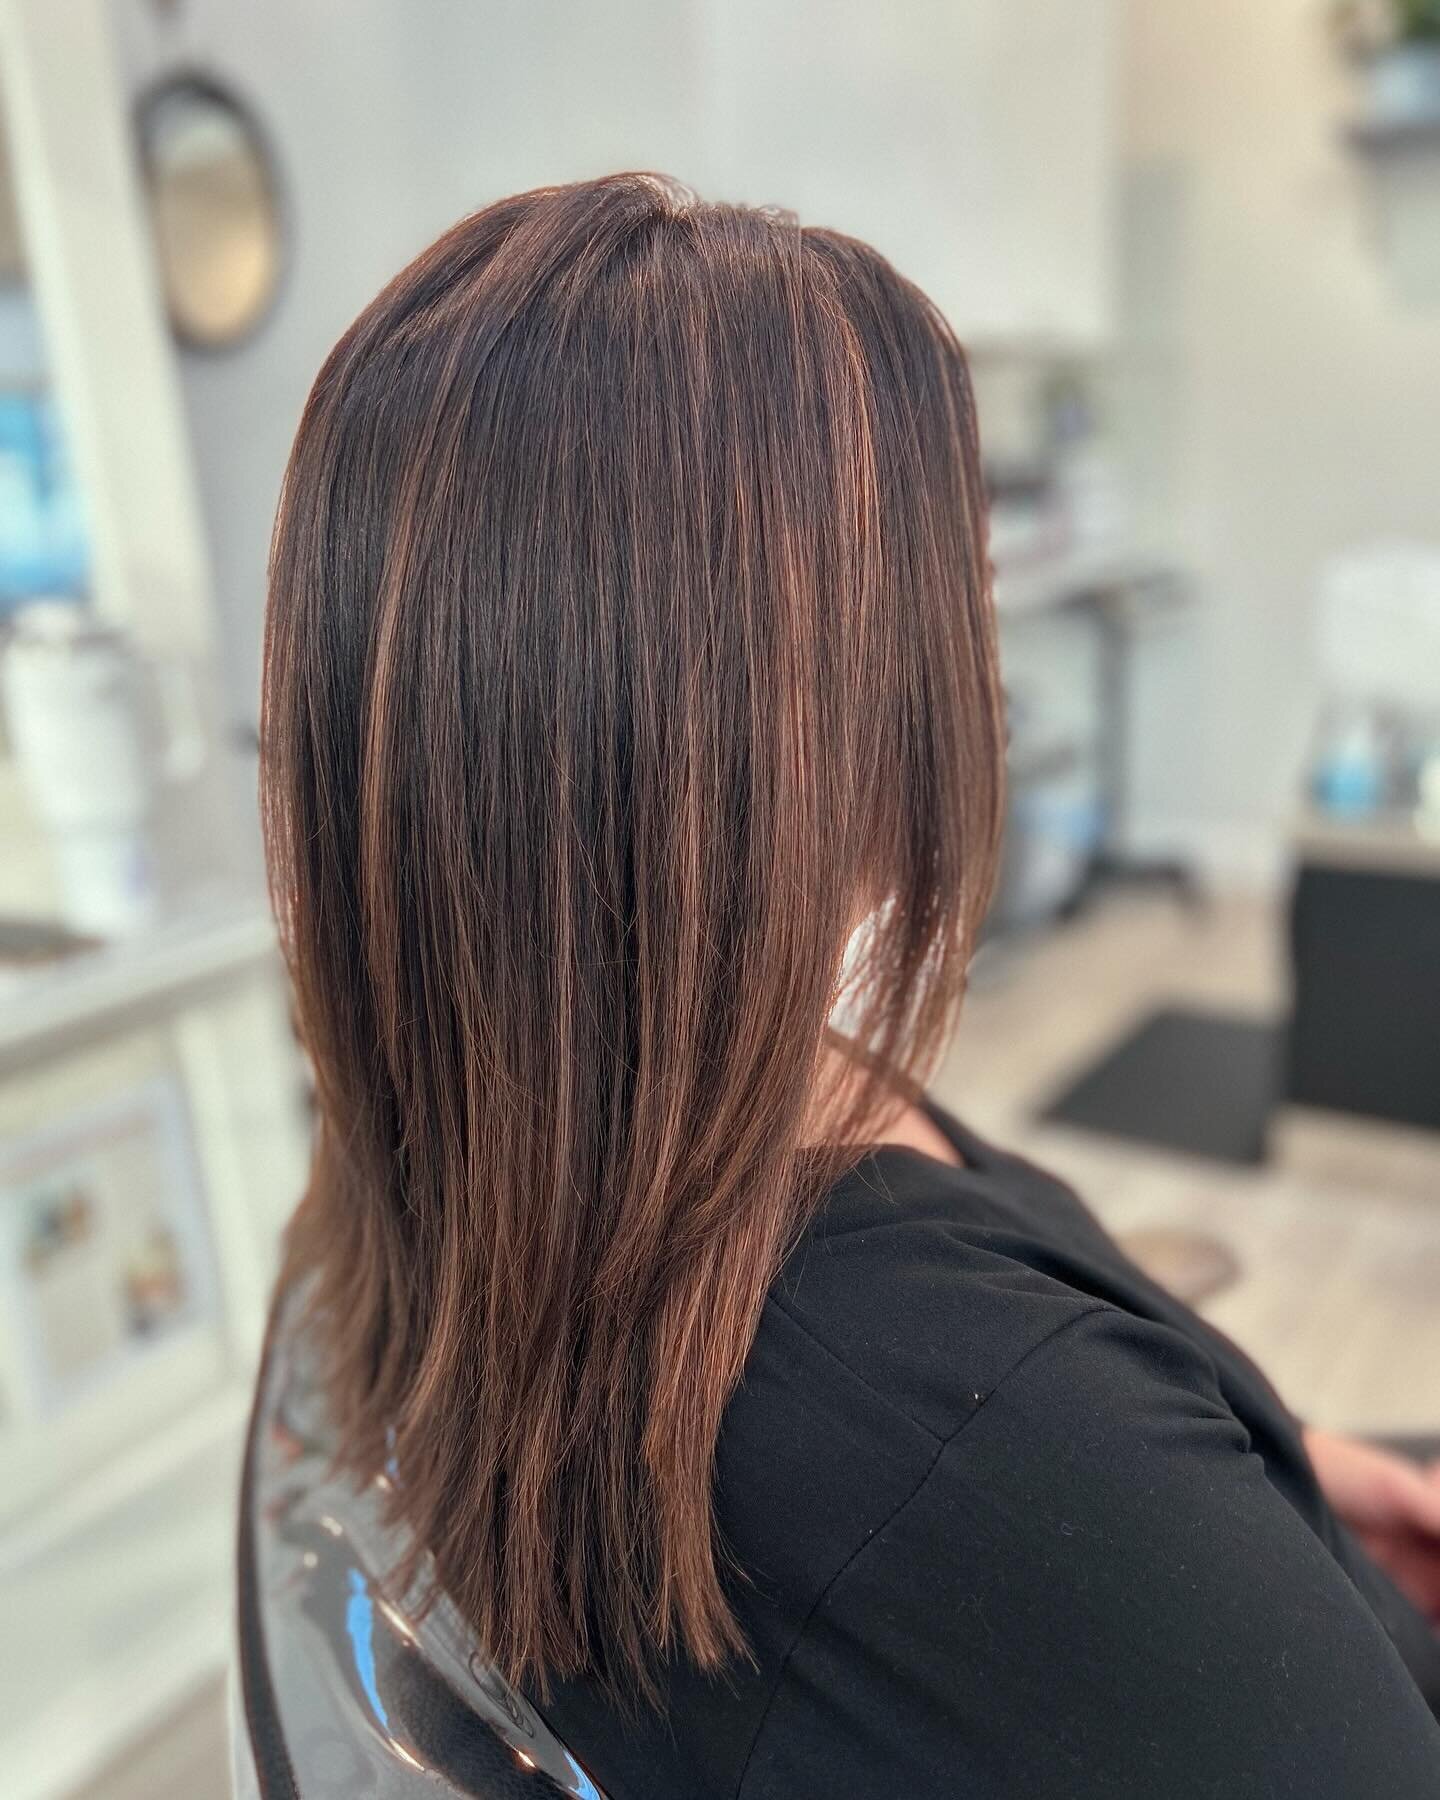 Who doesn&rsquo;t love a color refresh and depth for this time of year?! 🤎💛

This beauty came in looking to soften her highlights without getting rid of them completely, along with a fresh cut with movement and a NEW @davines Natural Tech Tailoring